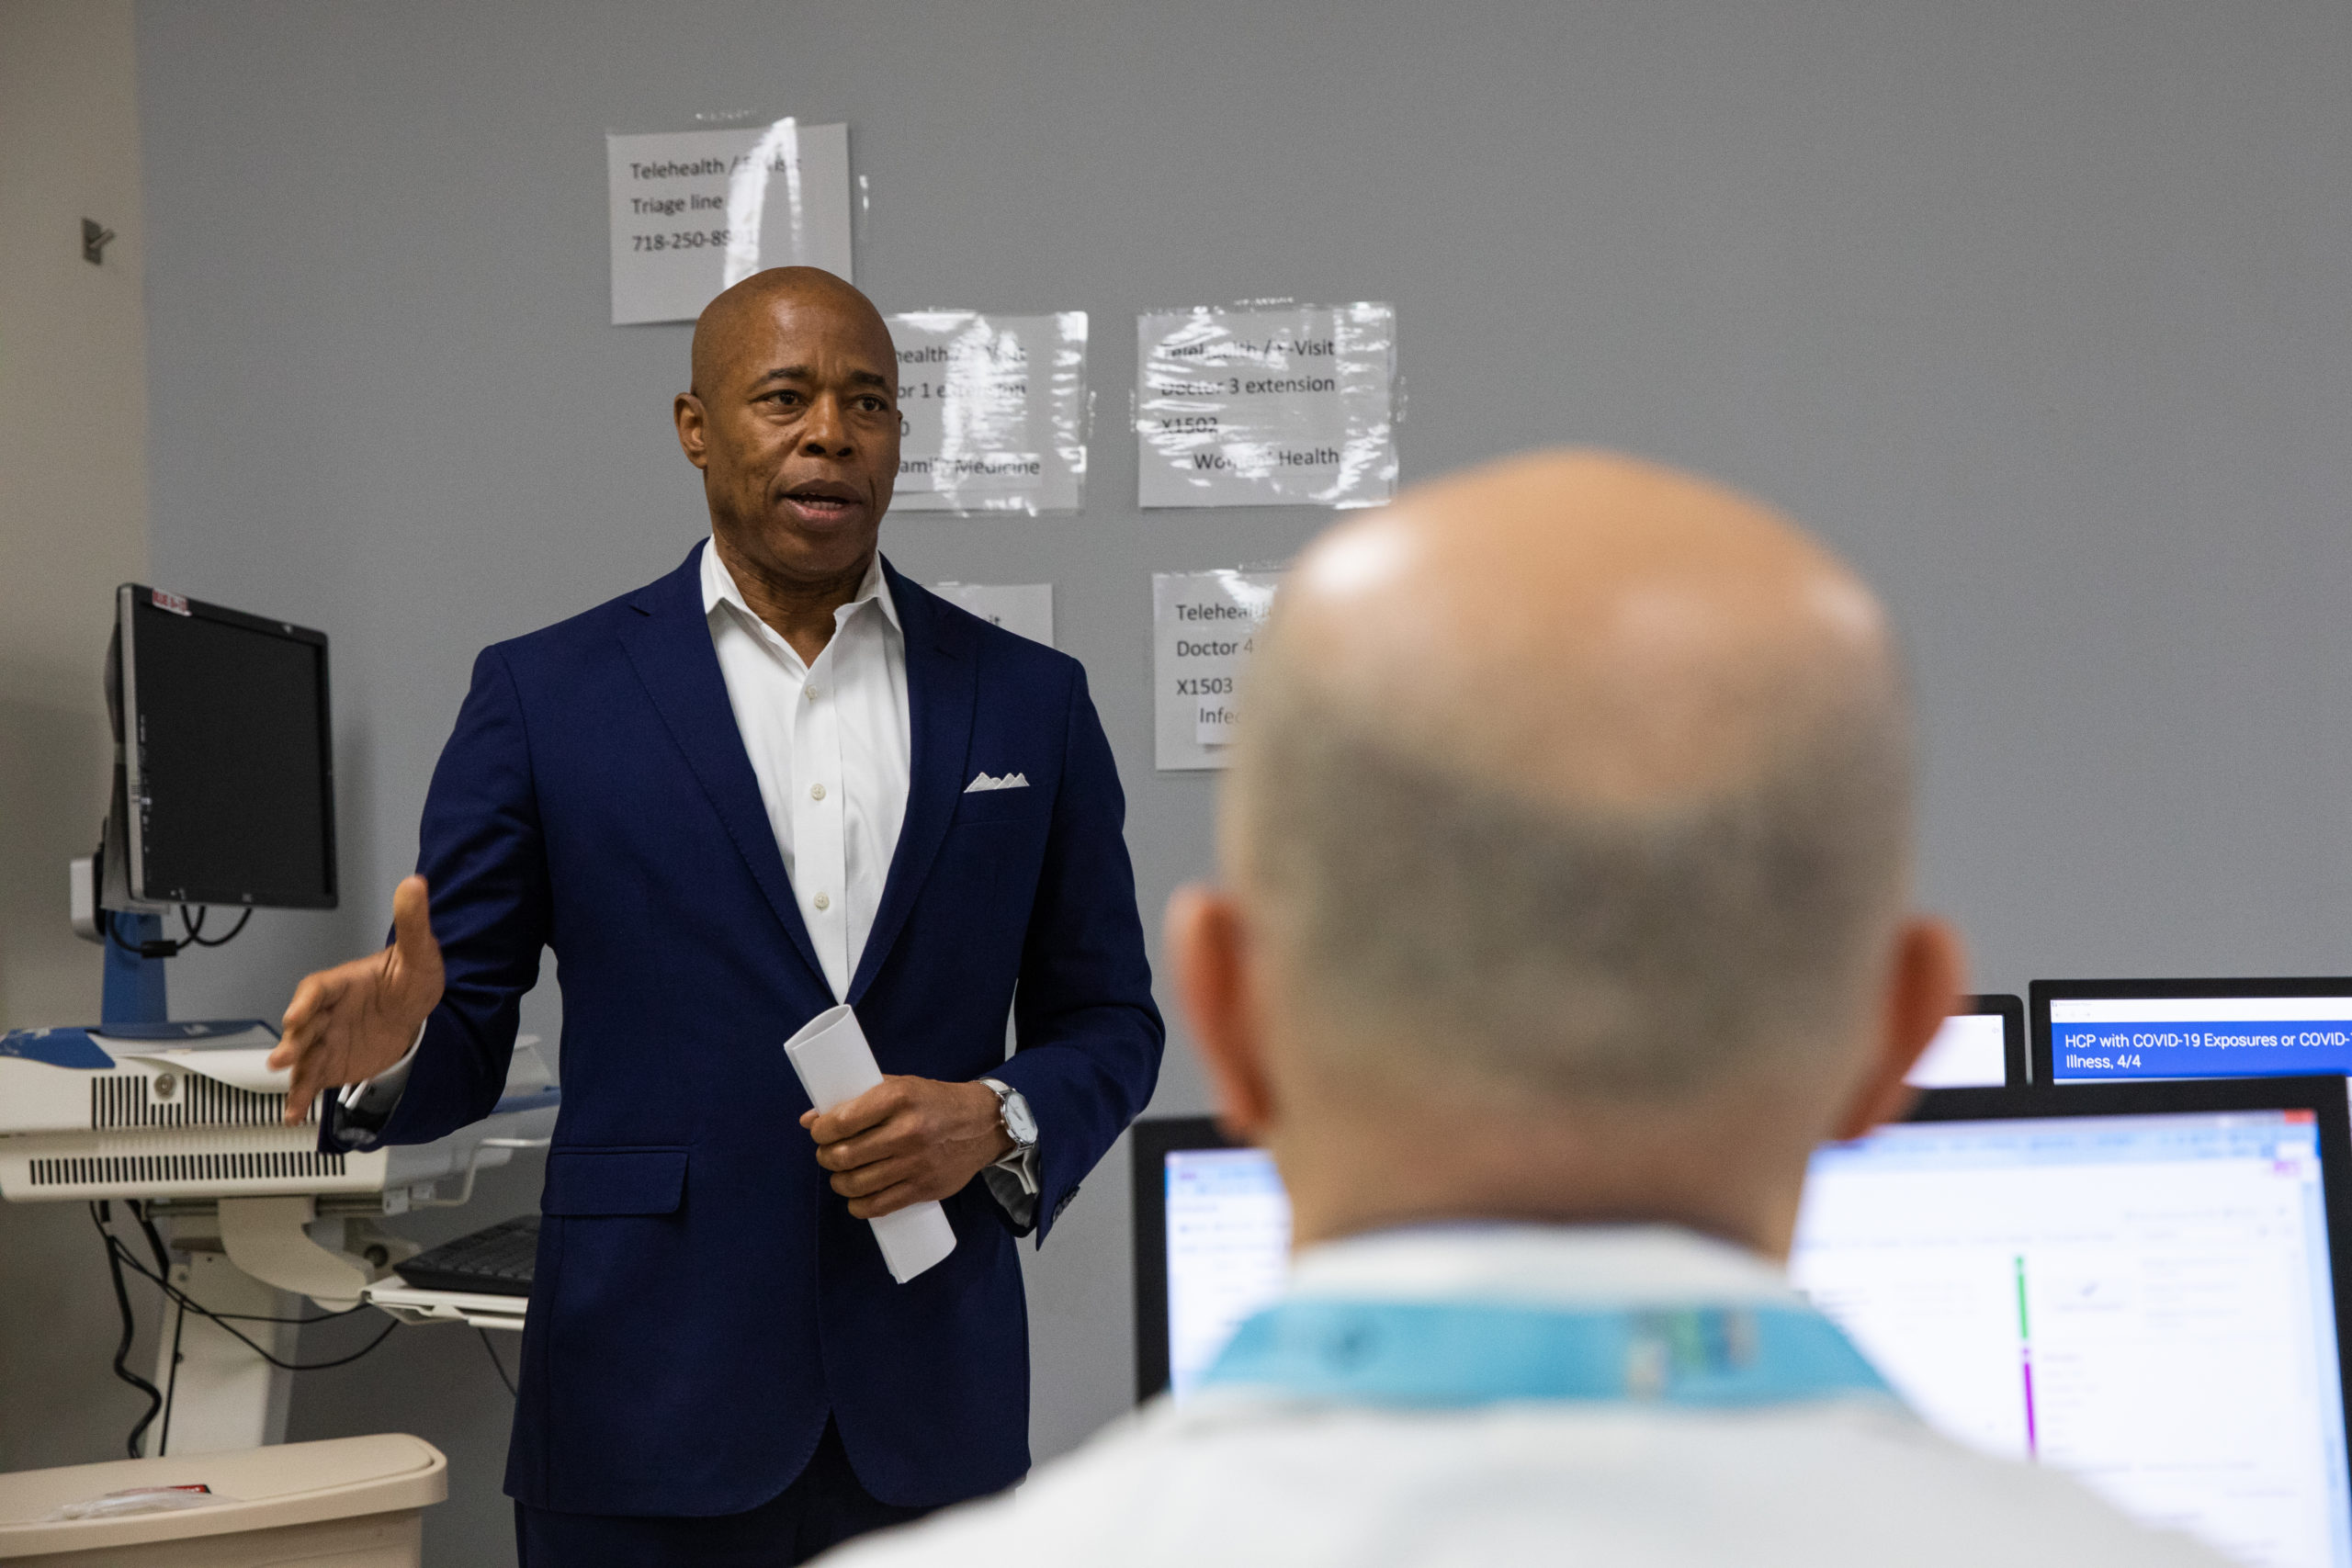 Brooklyn Hospital Center, with Brooklyn Borough President Eric Adams, promoted a new telemedicine command center in the hospital to take virtual appointments for pre-screenings of COVID-19. Photo: Paul Frangipane/Brooklyn Eagle